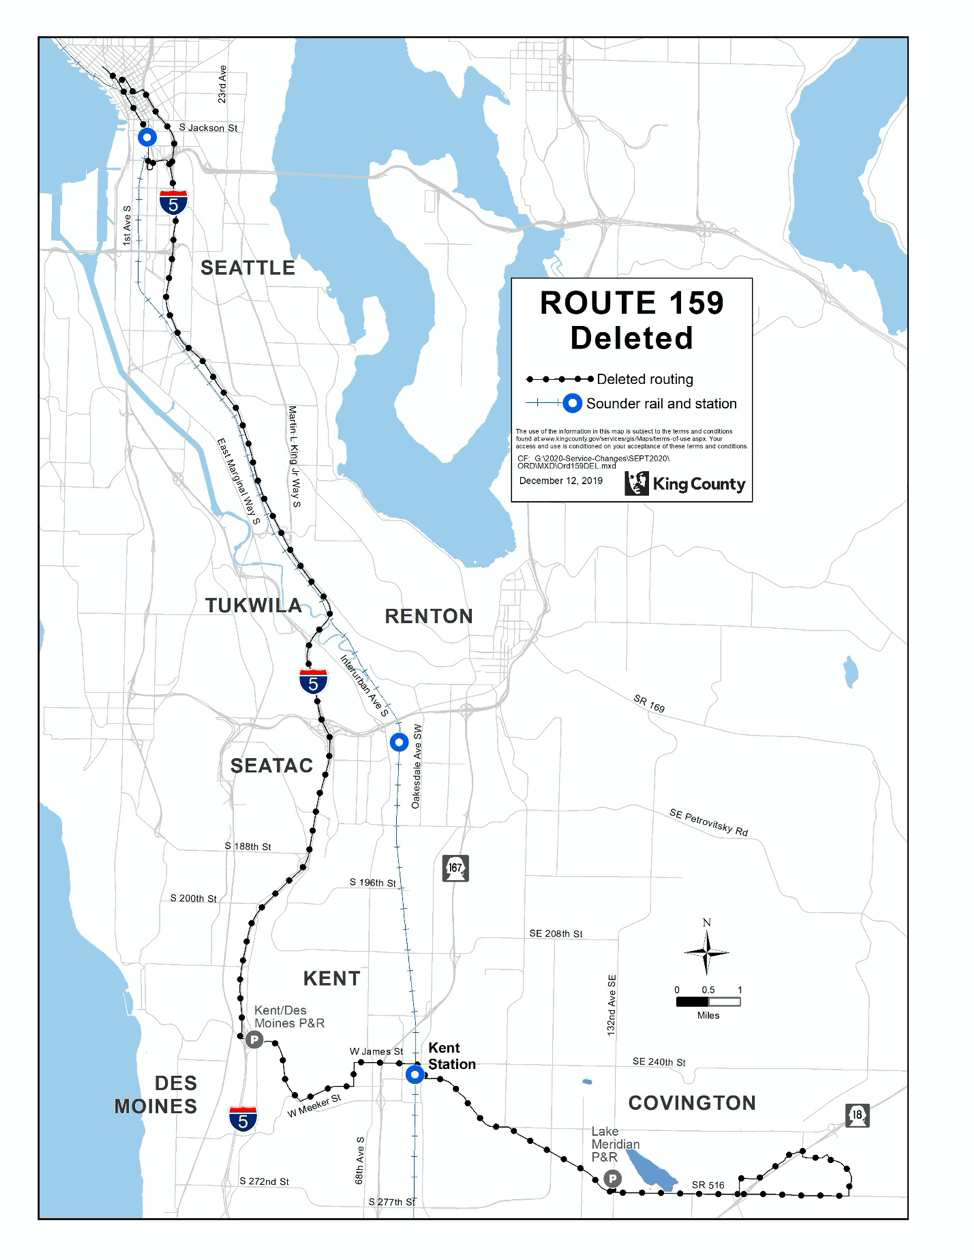 Deleted Route 159. (King County)